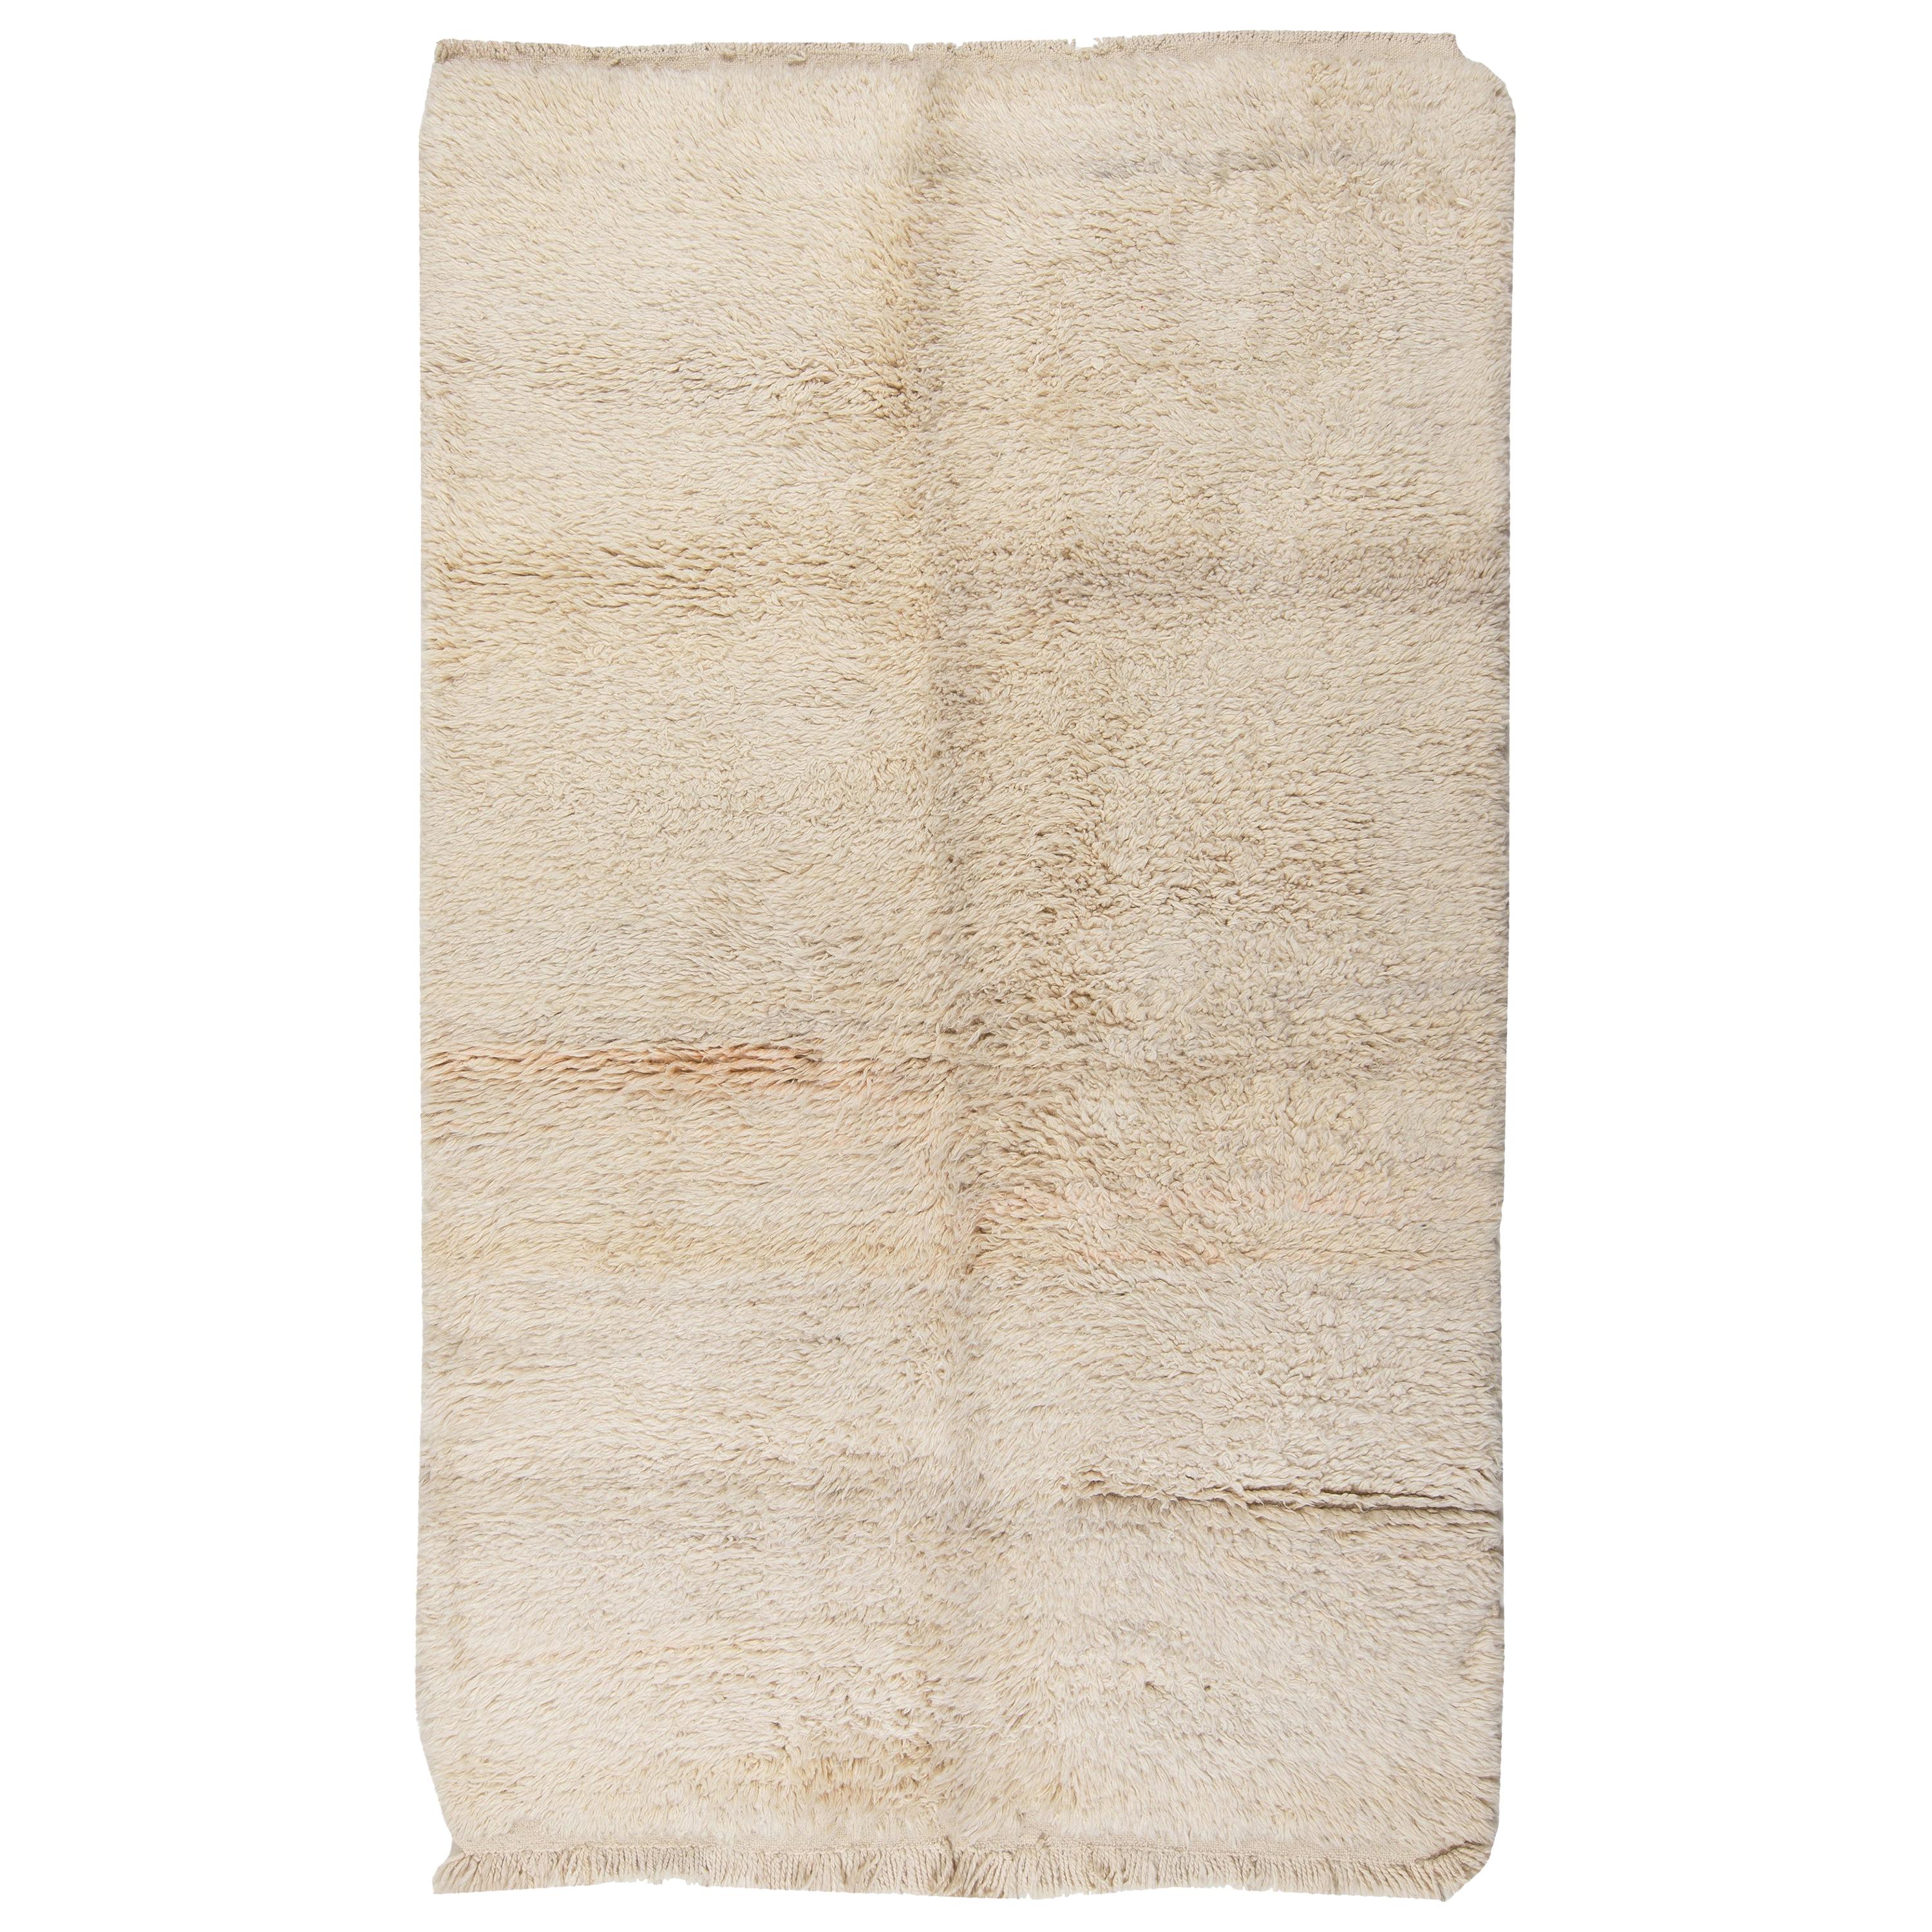 4.7x7.6 Ft Plain Ivory Central Anatolian "Tulu" Rug made of Natural Undyed Wool